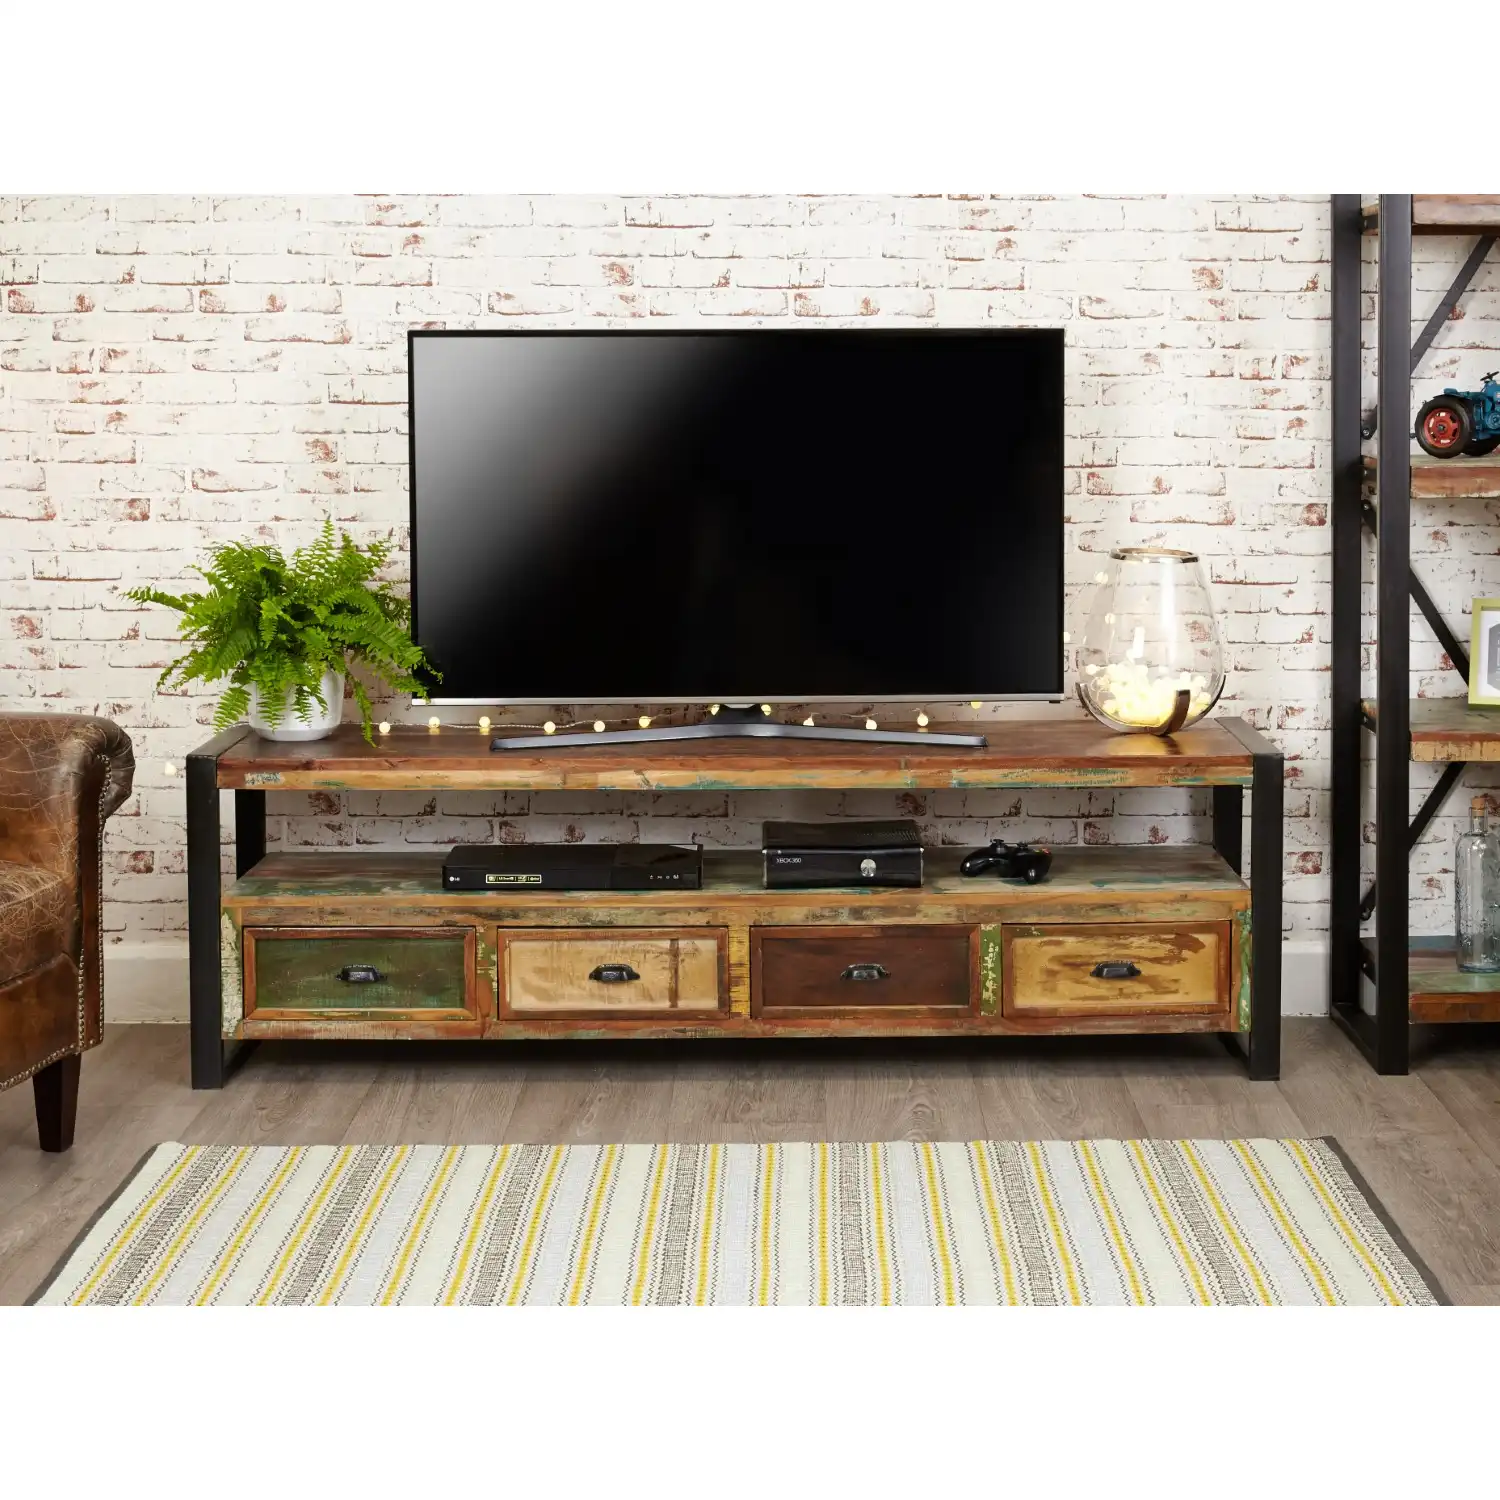 Reclaimed Wood Large Open Widescreen TV Cabinet Unit With Drawers